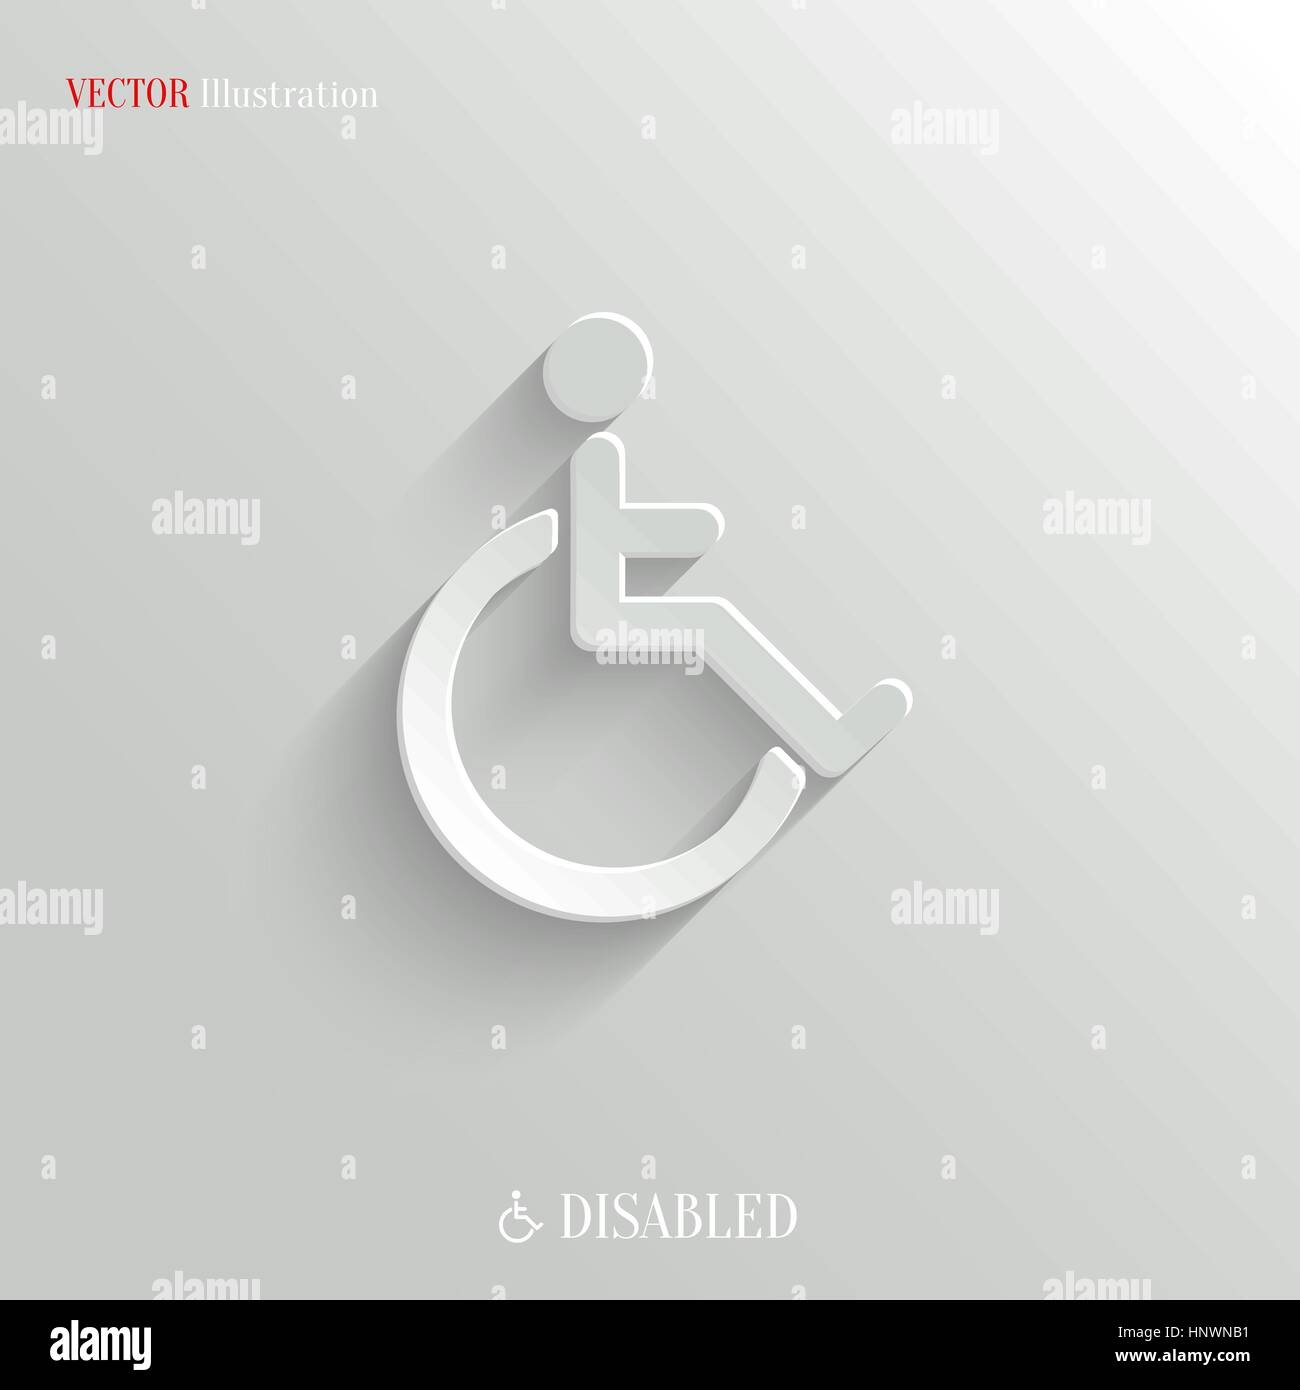 Disabled icon - vector web illustration, easy paste to any background Stock Vector